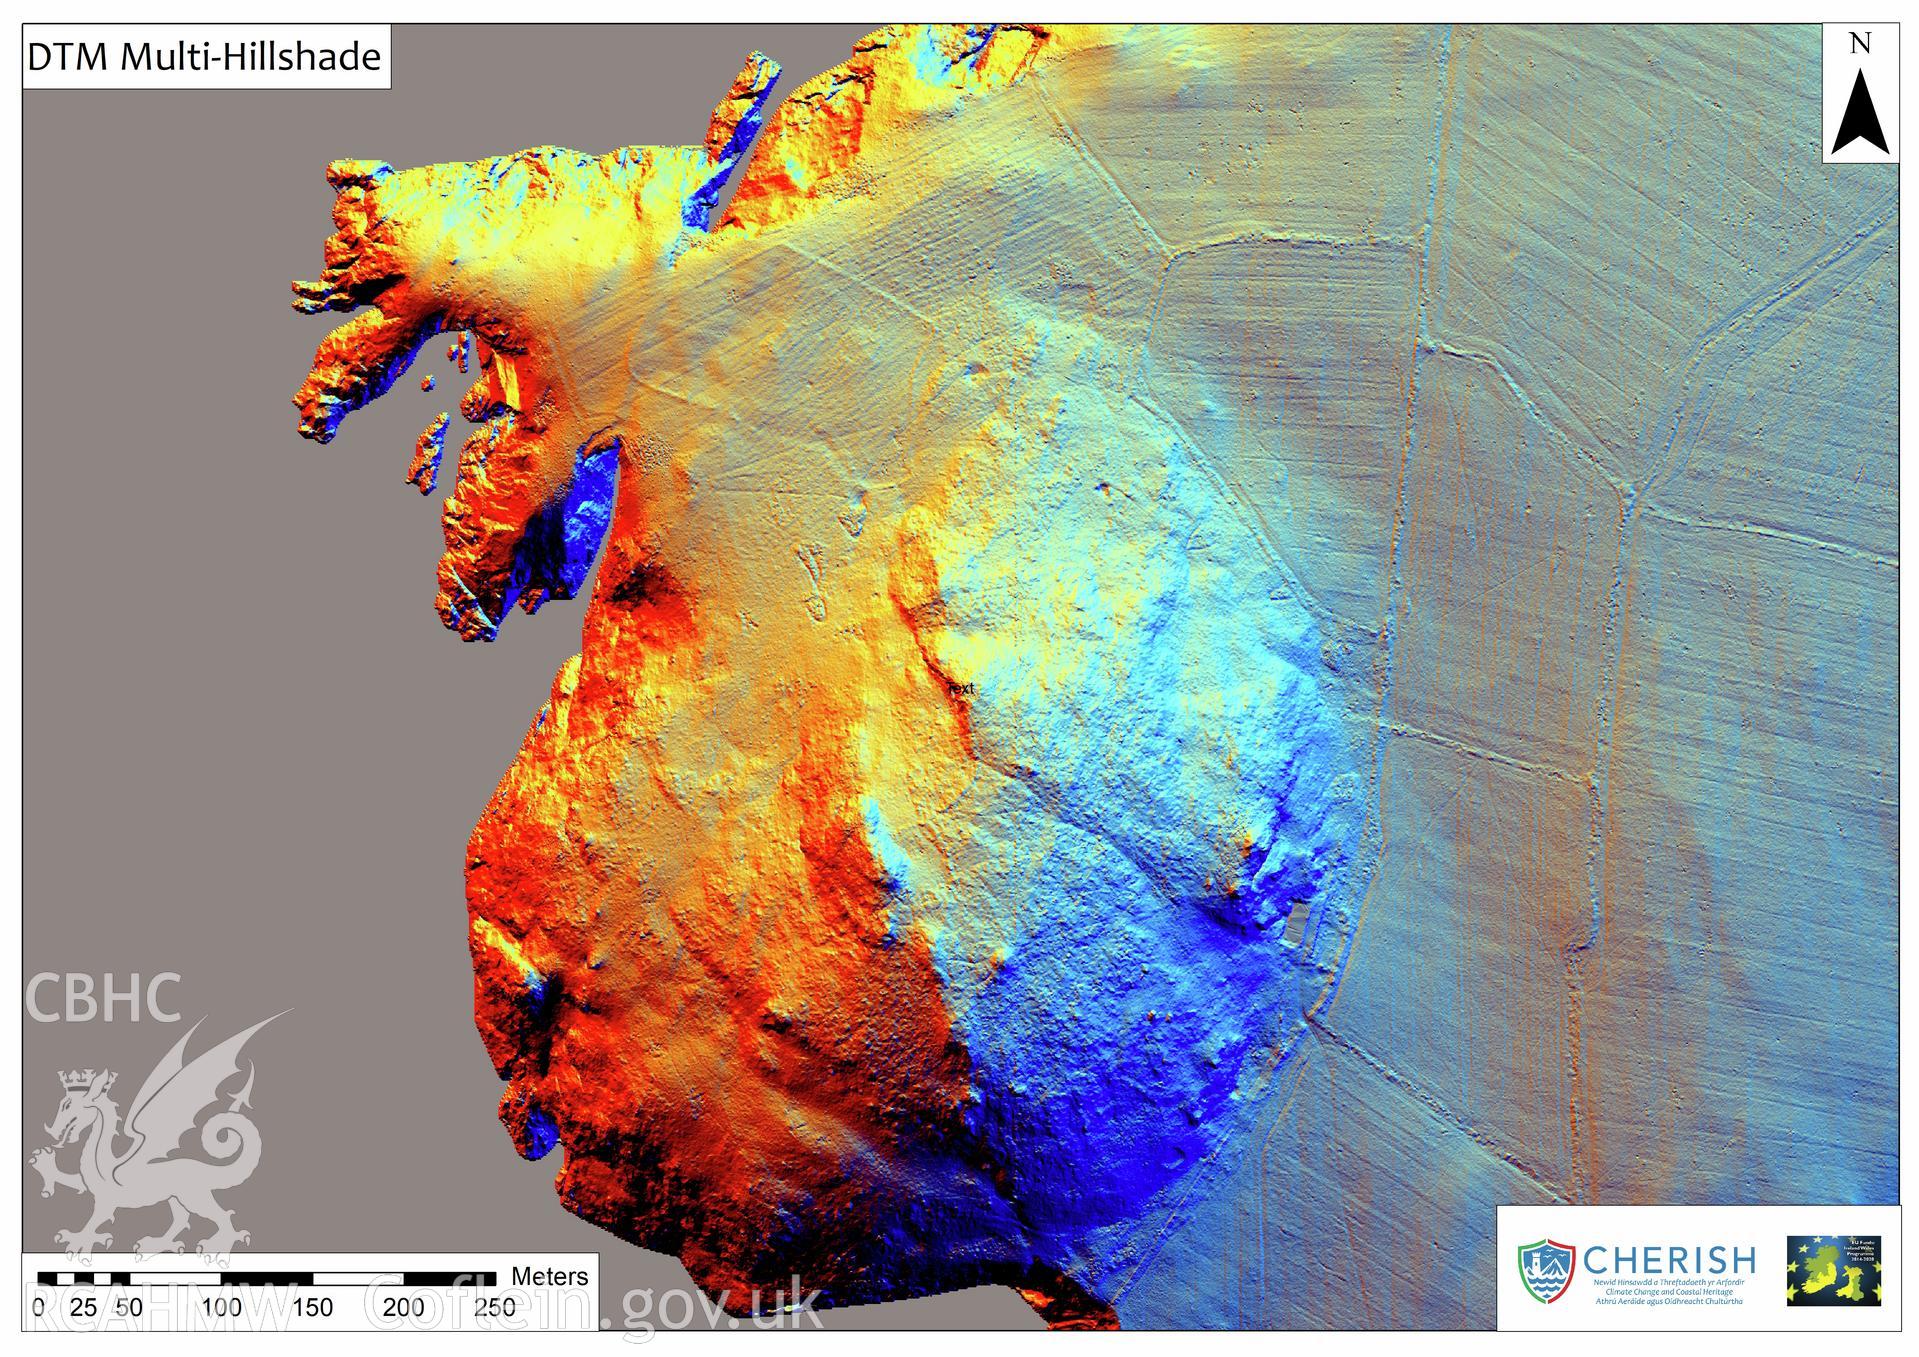 Ramsey Island. Airborne laser scanning (LiDAR) commissioned by the CHERISH Project 2017-2021, flown by Bluesky International LTD at low tide on 24th February 2017. View showing Digital Terrain Model (DTM) of Carn Ysgubor field systems with multi-hill shading.